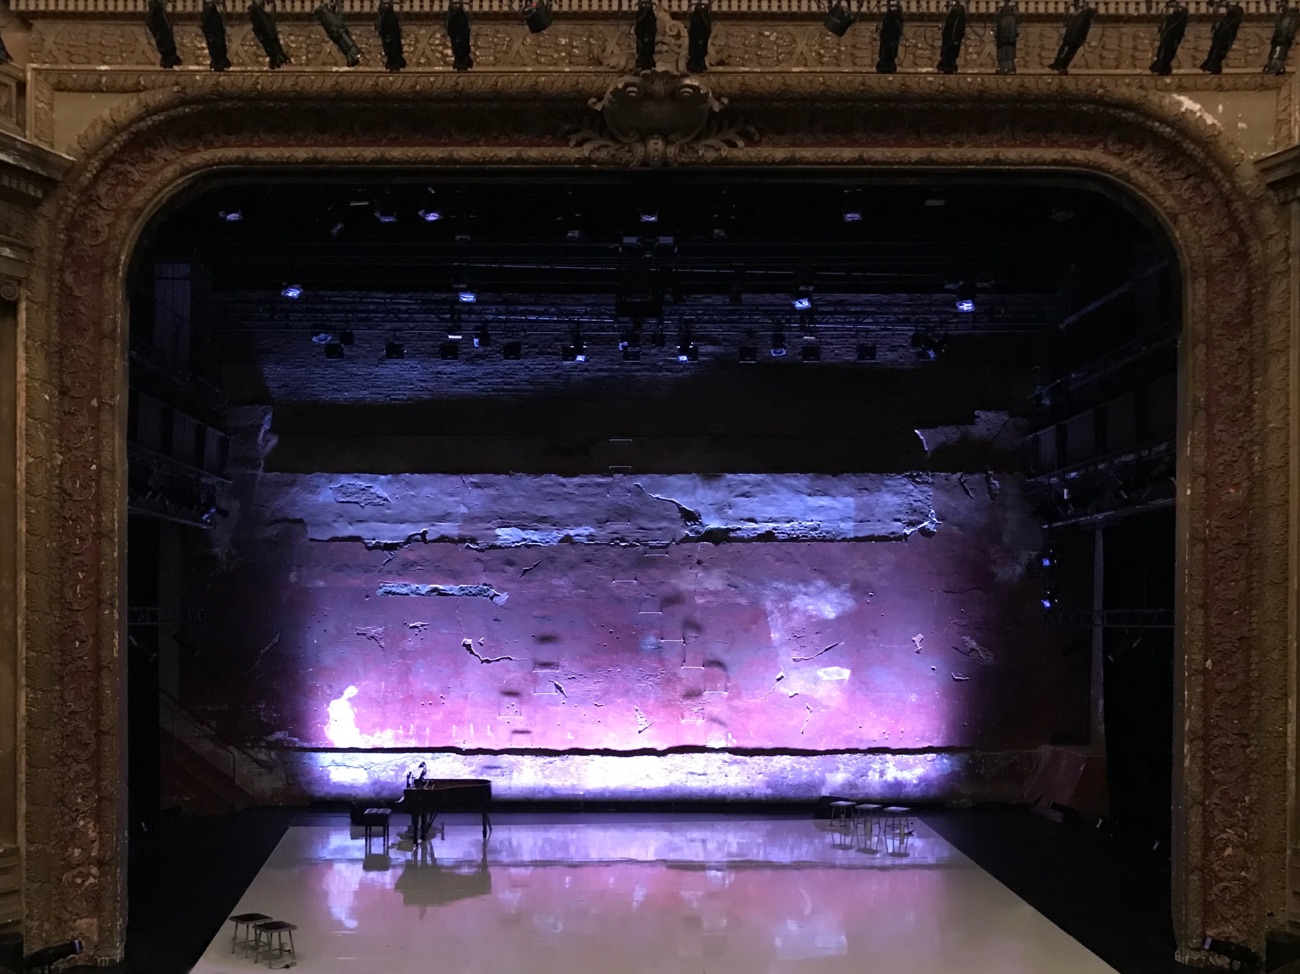 The open stage at the Brooklyn Academy of Music right before the world premiere of Meredith Monk’s Cellular Songs, empty but for four stools and a piano in the corners